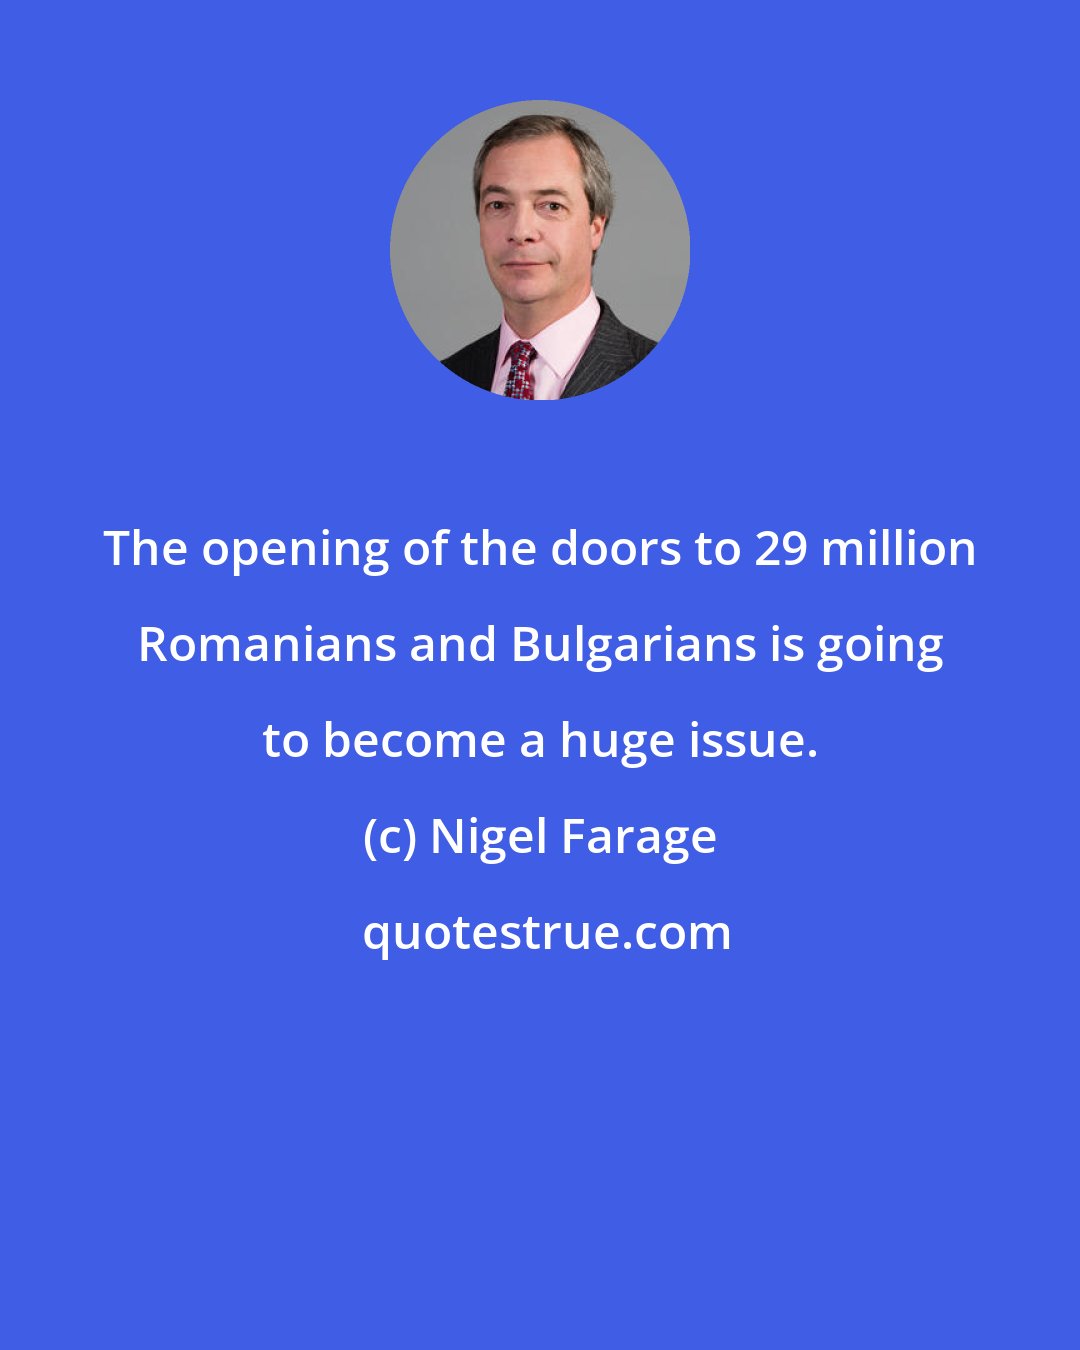 Nigel Farage: The opening of the doors to 29 million Romanians and Bulgarians is going to become a huge issue.